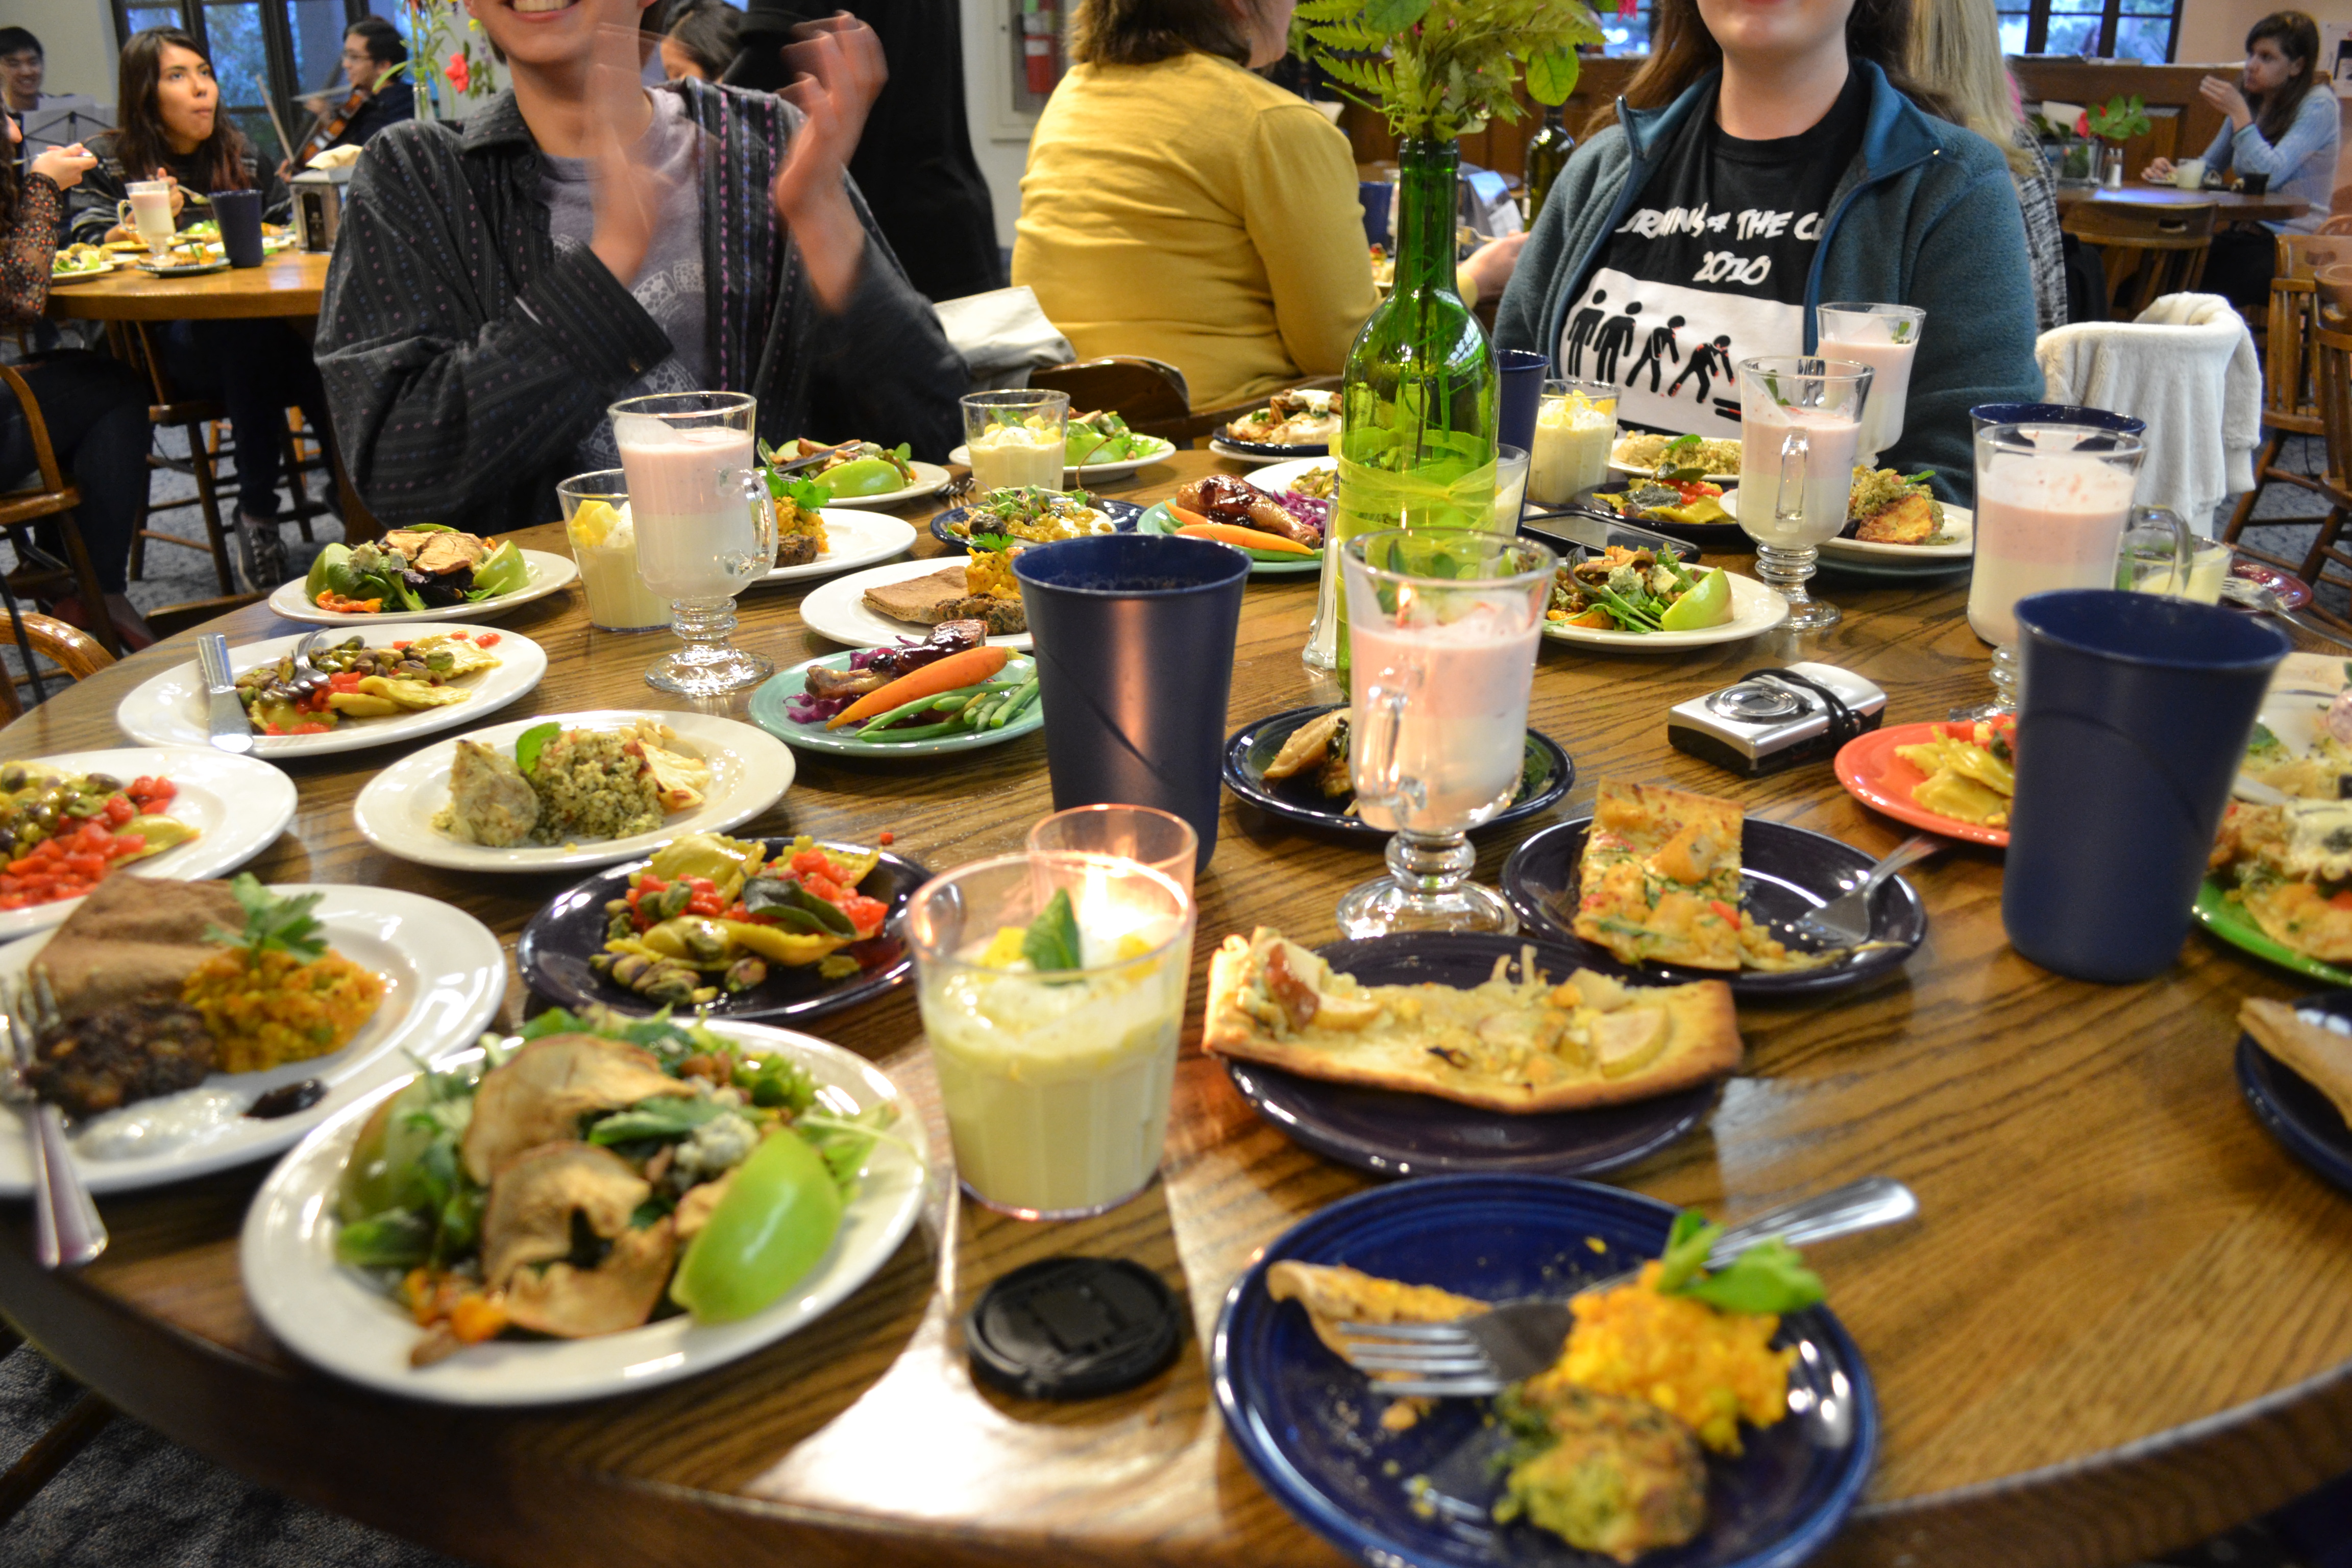 Look at all the wonderful dishes!  Photo credit Roxana Garcia